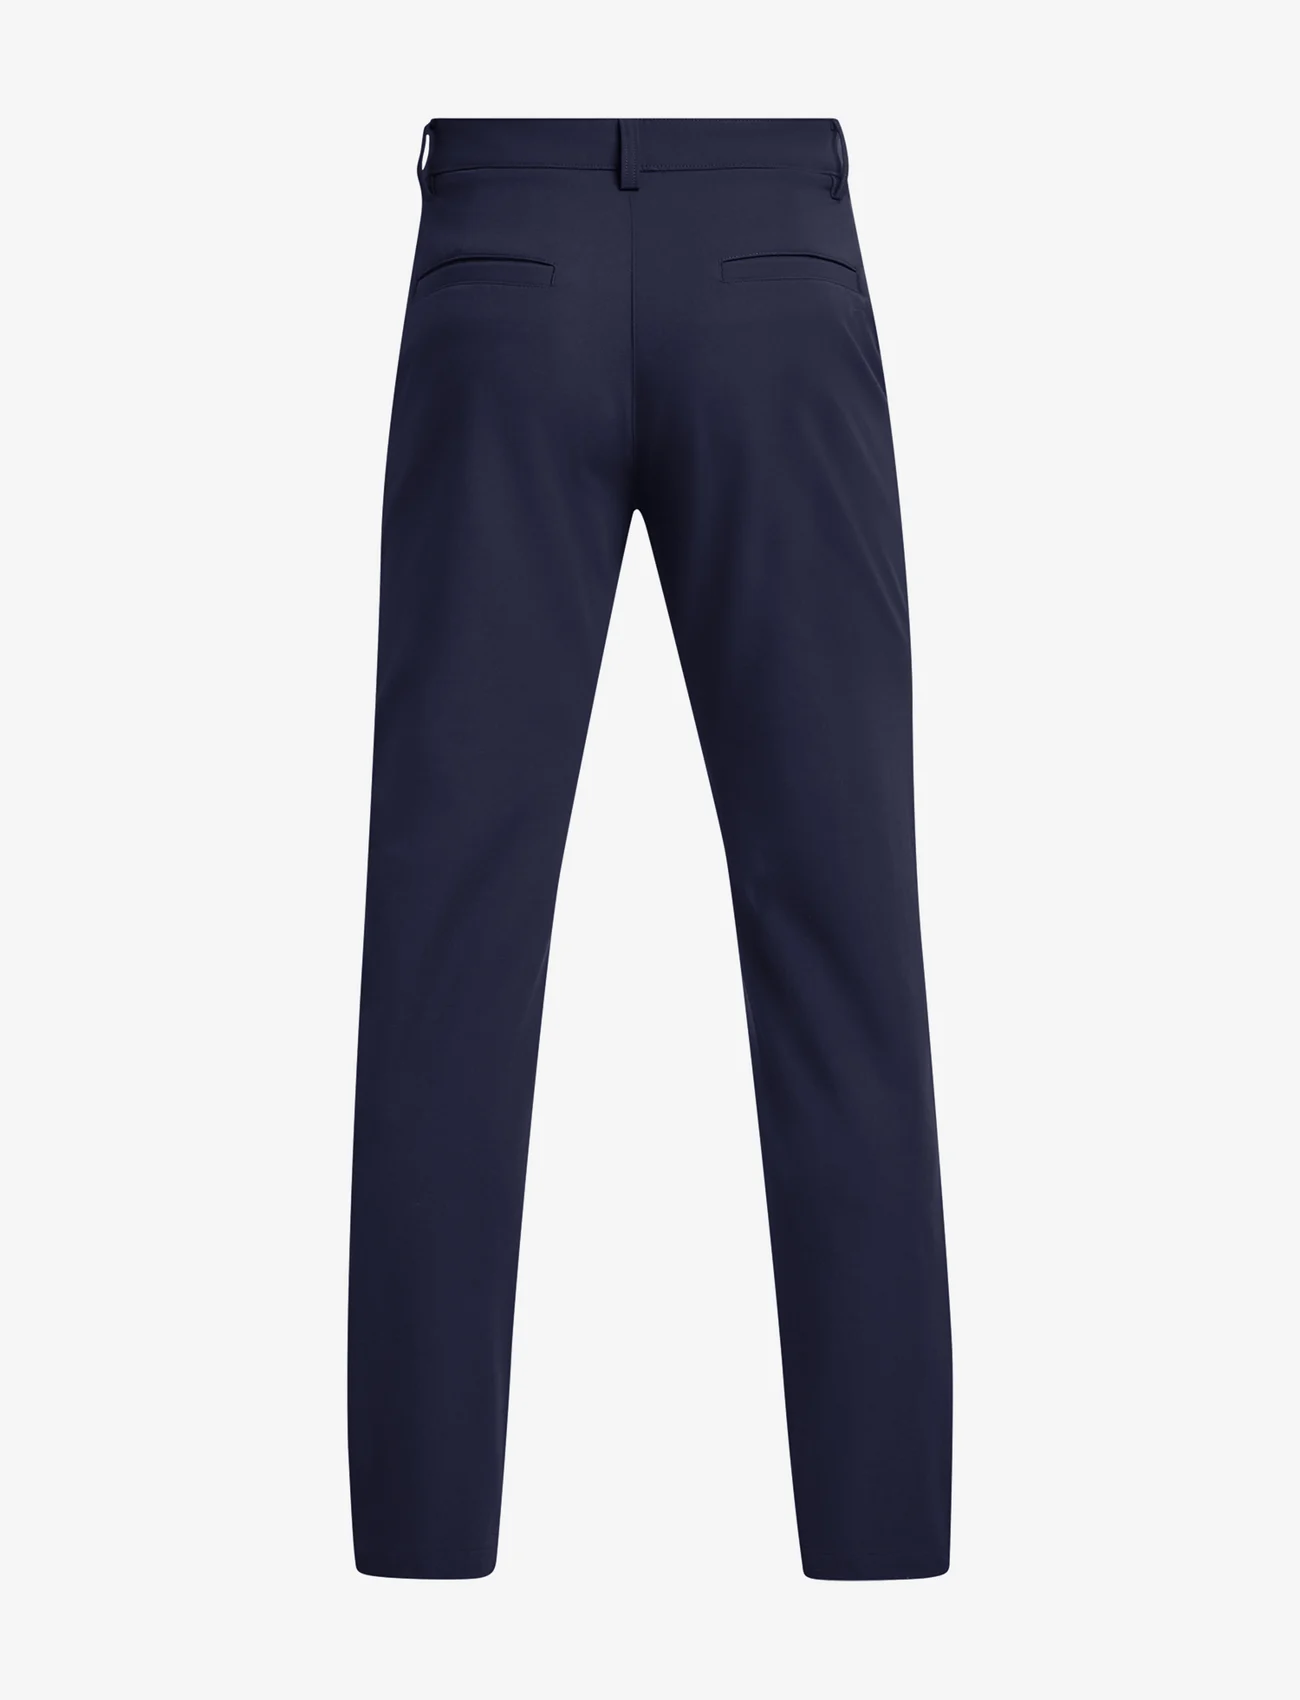 Under Armour - UA Tech Tapered Pant - golf pants - midnight navy - 1